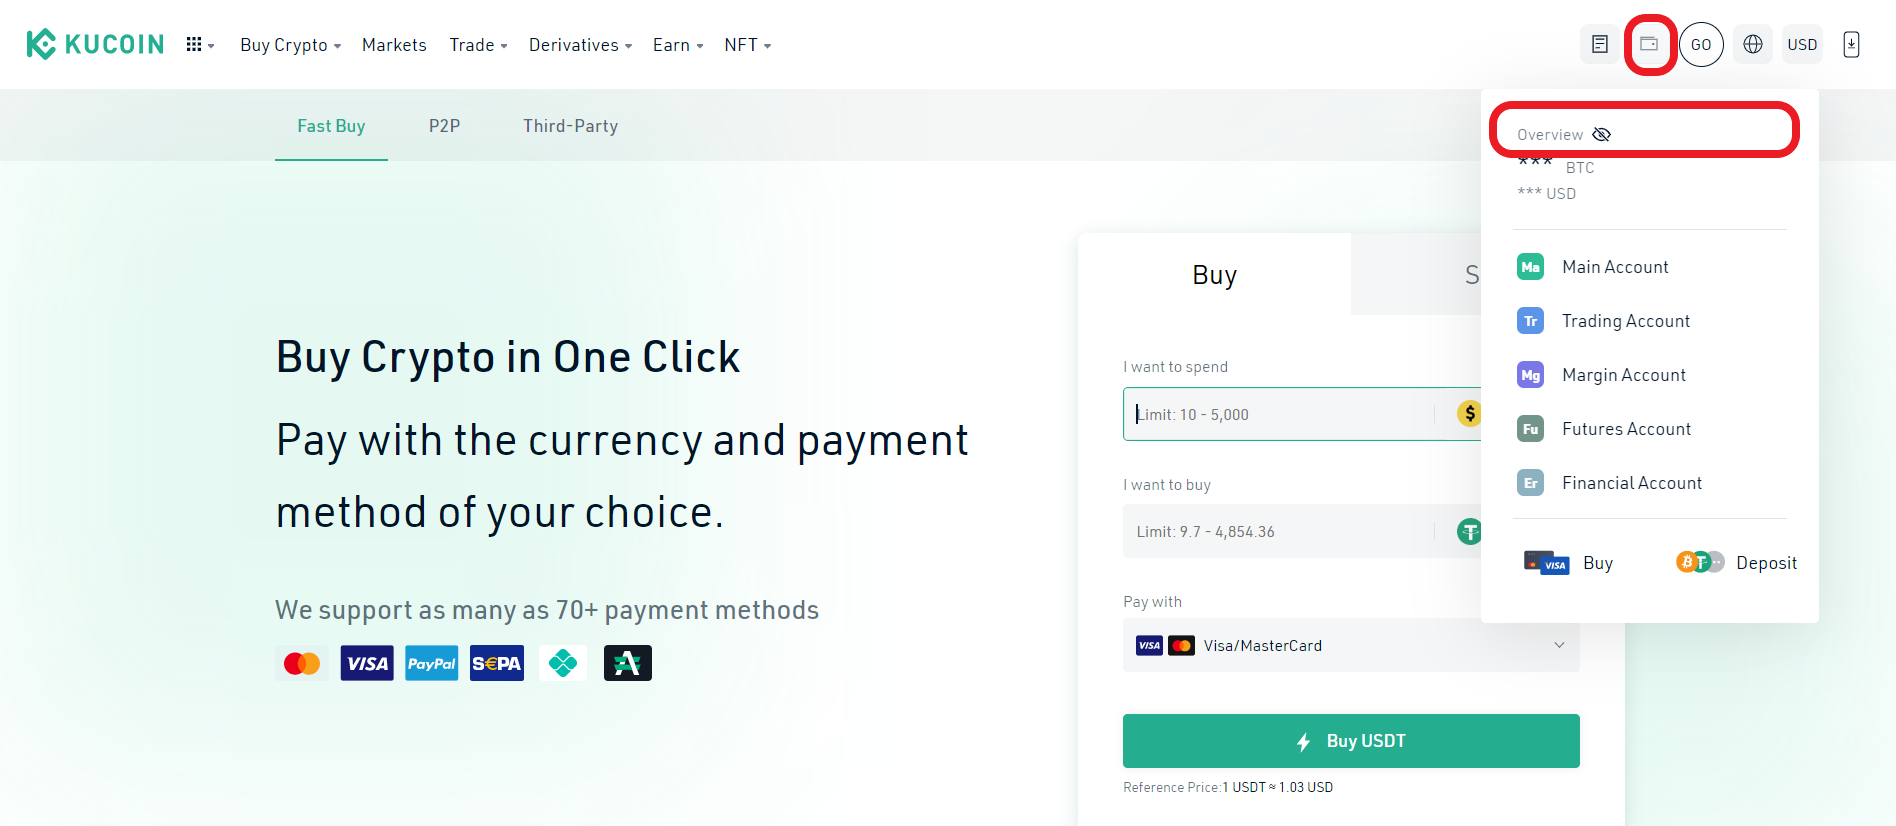 how to download kucoin order histoiry